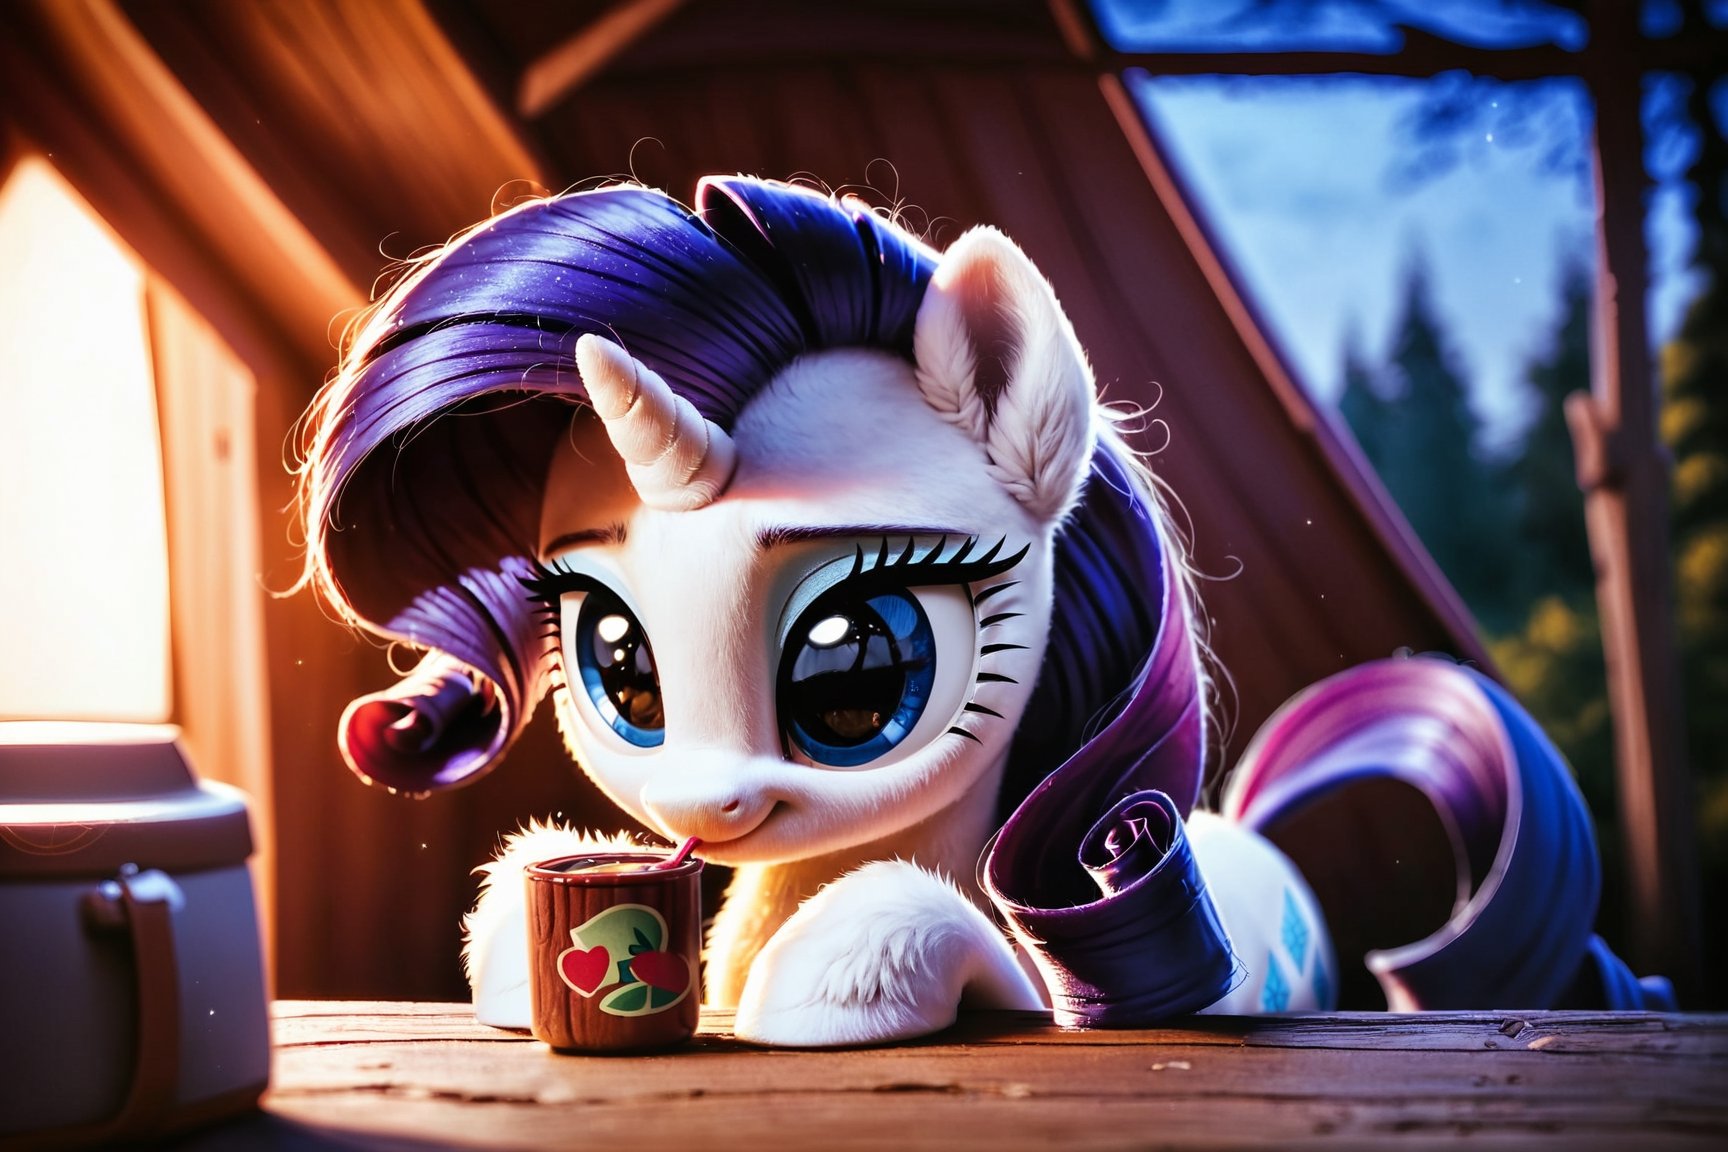 score_9, score_8_up, score_7_up, score_6_up, 3 pony sex, sweetie_bell_(mlp), Rarity_(mlp), drinking tea, ((cute, little, fuzzy pony, fur)), (high quality, detailed shadows), night, adorable face, detailed beautiful eyes, wood, camping, realistic, outstanding, countershading, detailed soft lighting, cinematic vintage photography, realistic, anime, cute, aw0k euphoric style, realistic, show accurate,